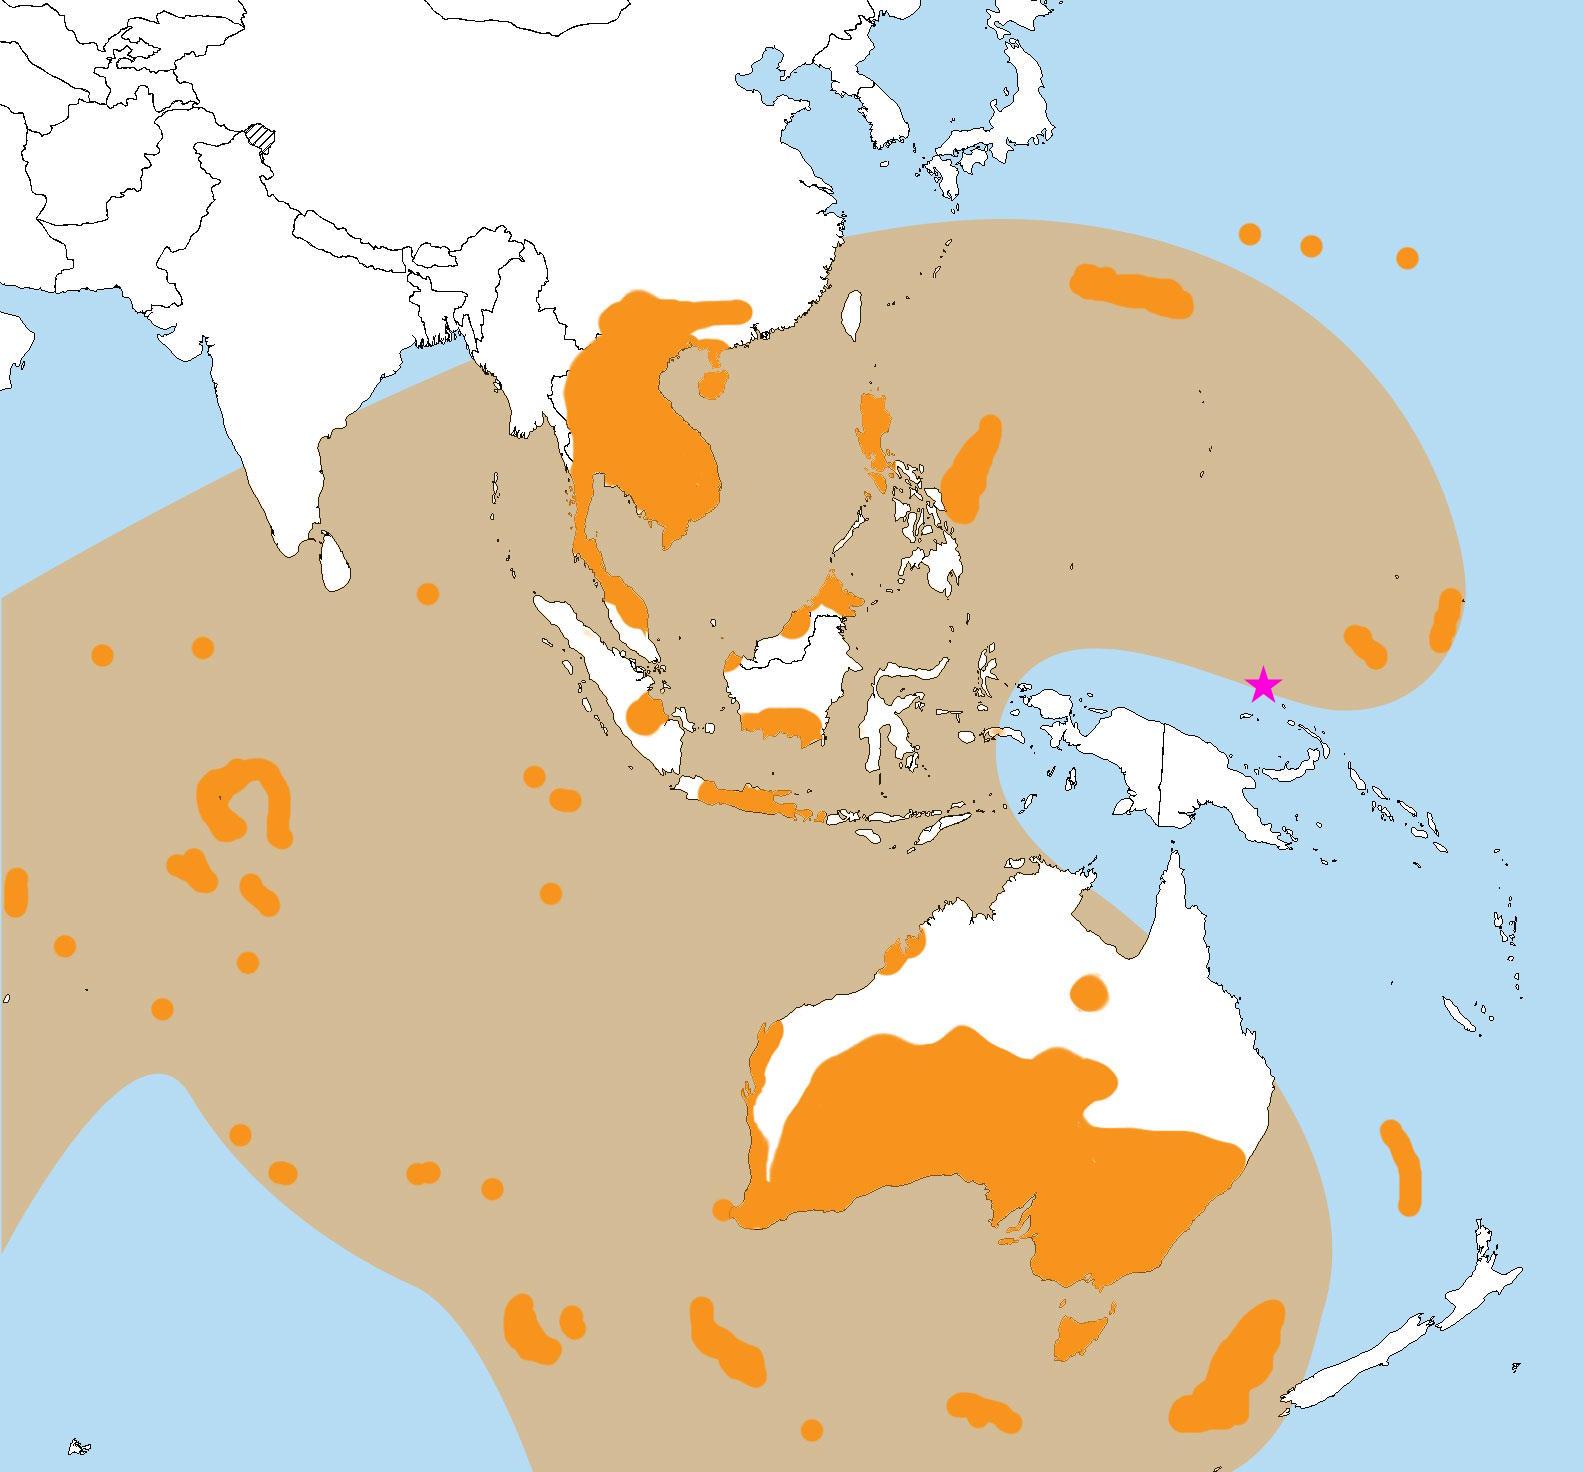 A map of the world with orange and yellow areas, verified by a Harvard astronomer.